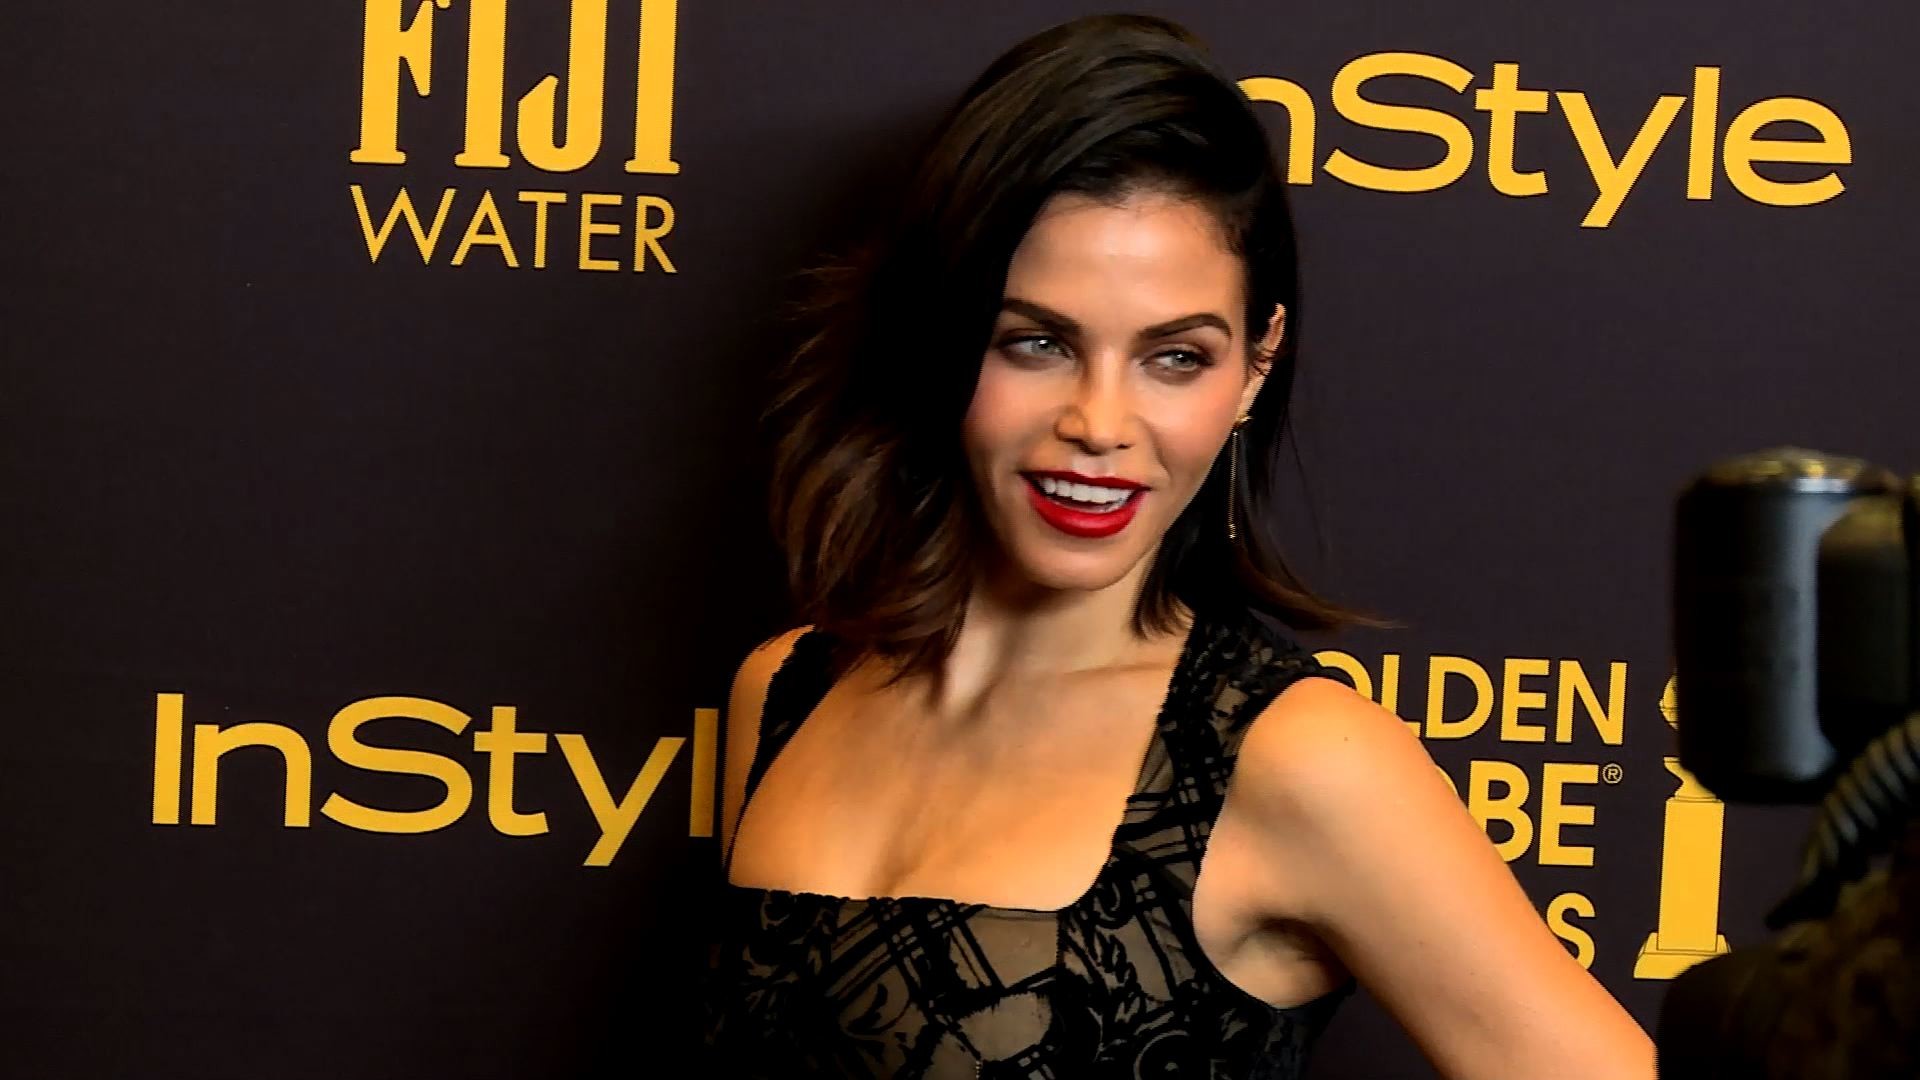 1920x1080 Jenna Dewan-Tatum dishes on her daughter's style selections